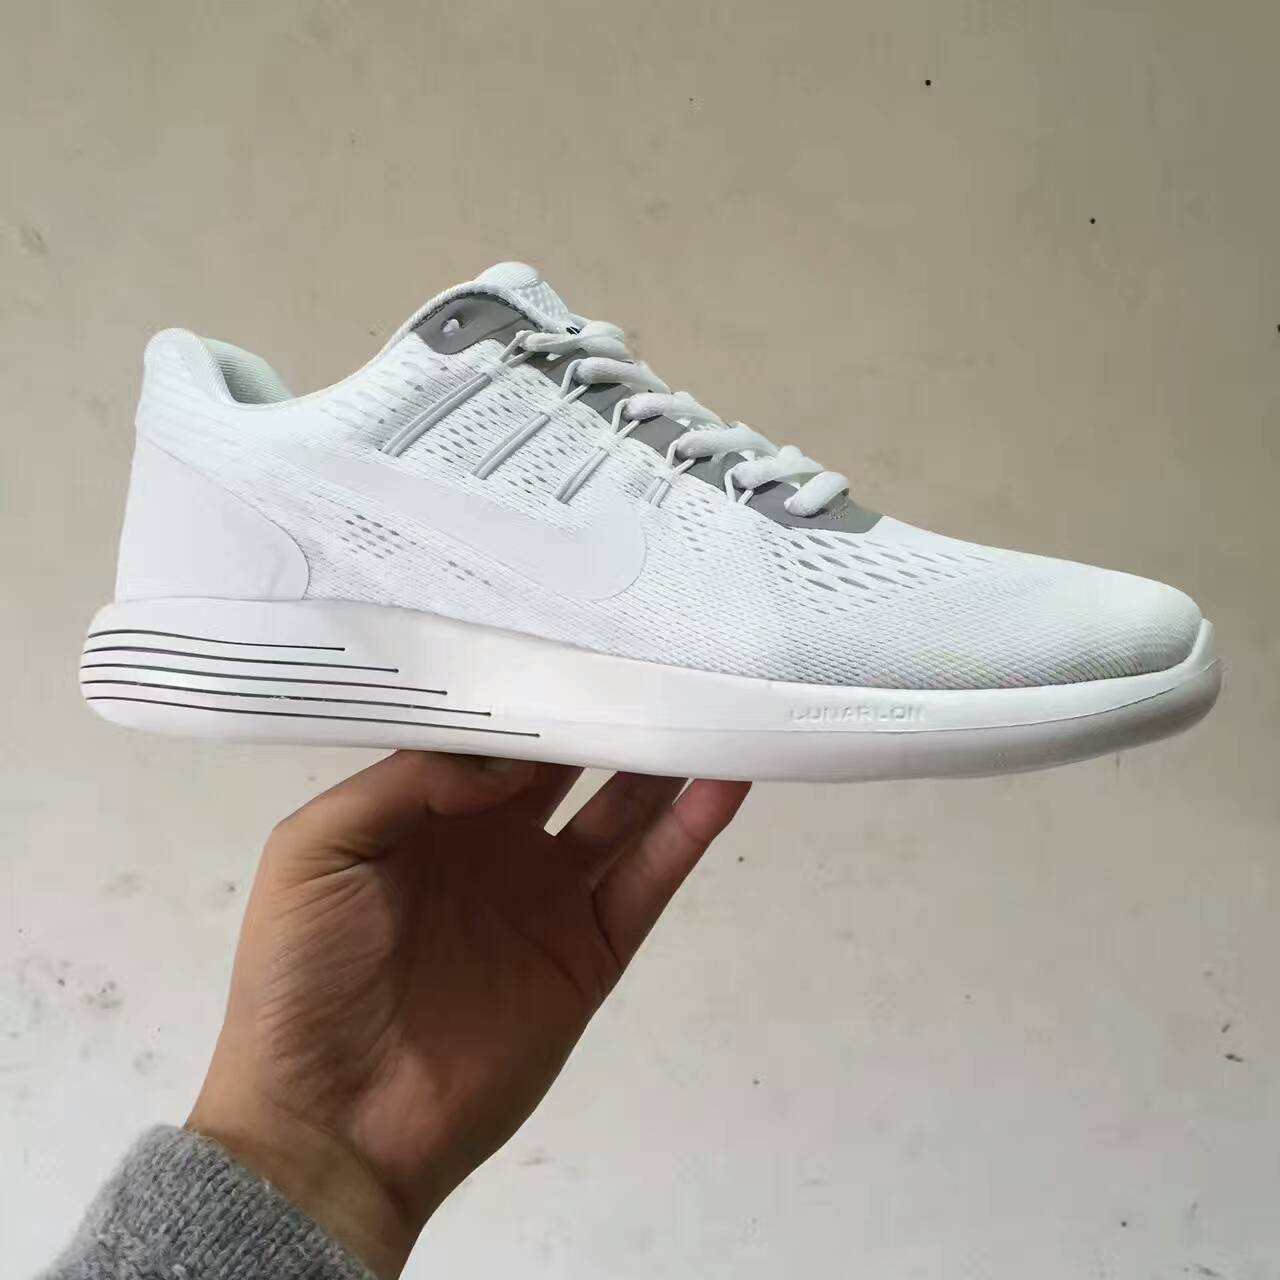 Nike Lunar GLIDE8 SP All White Shoes